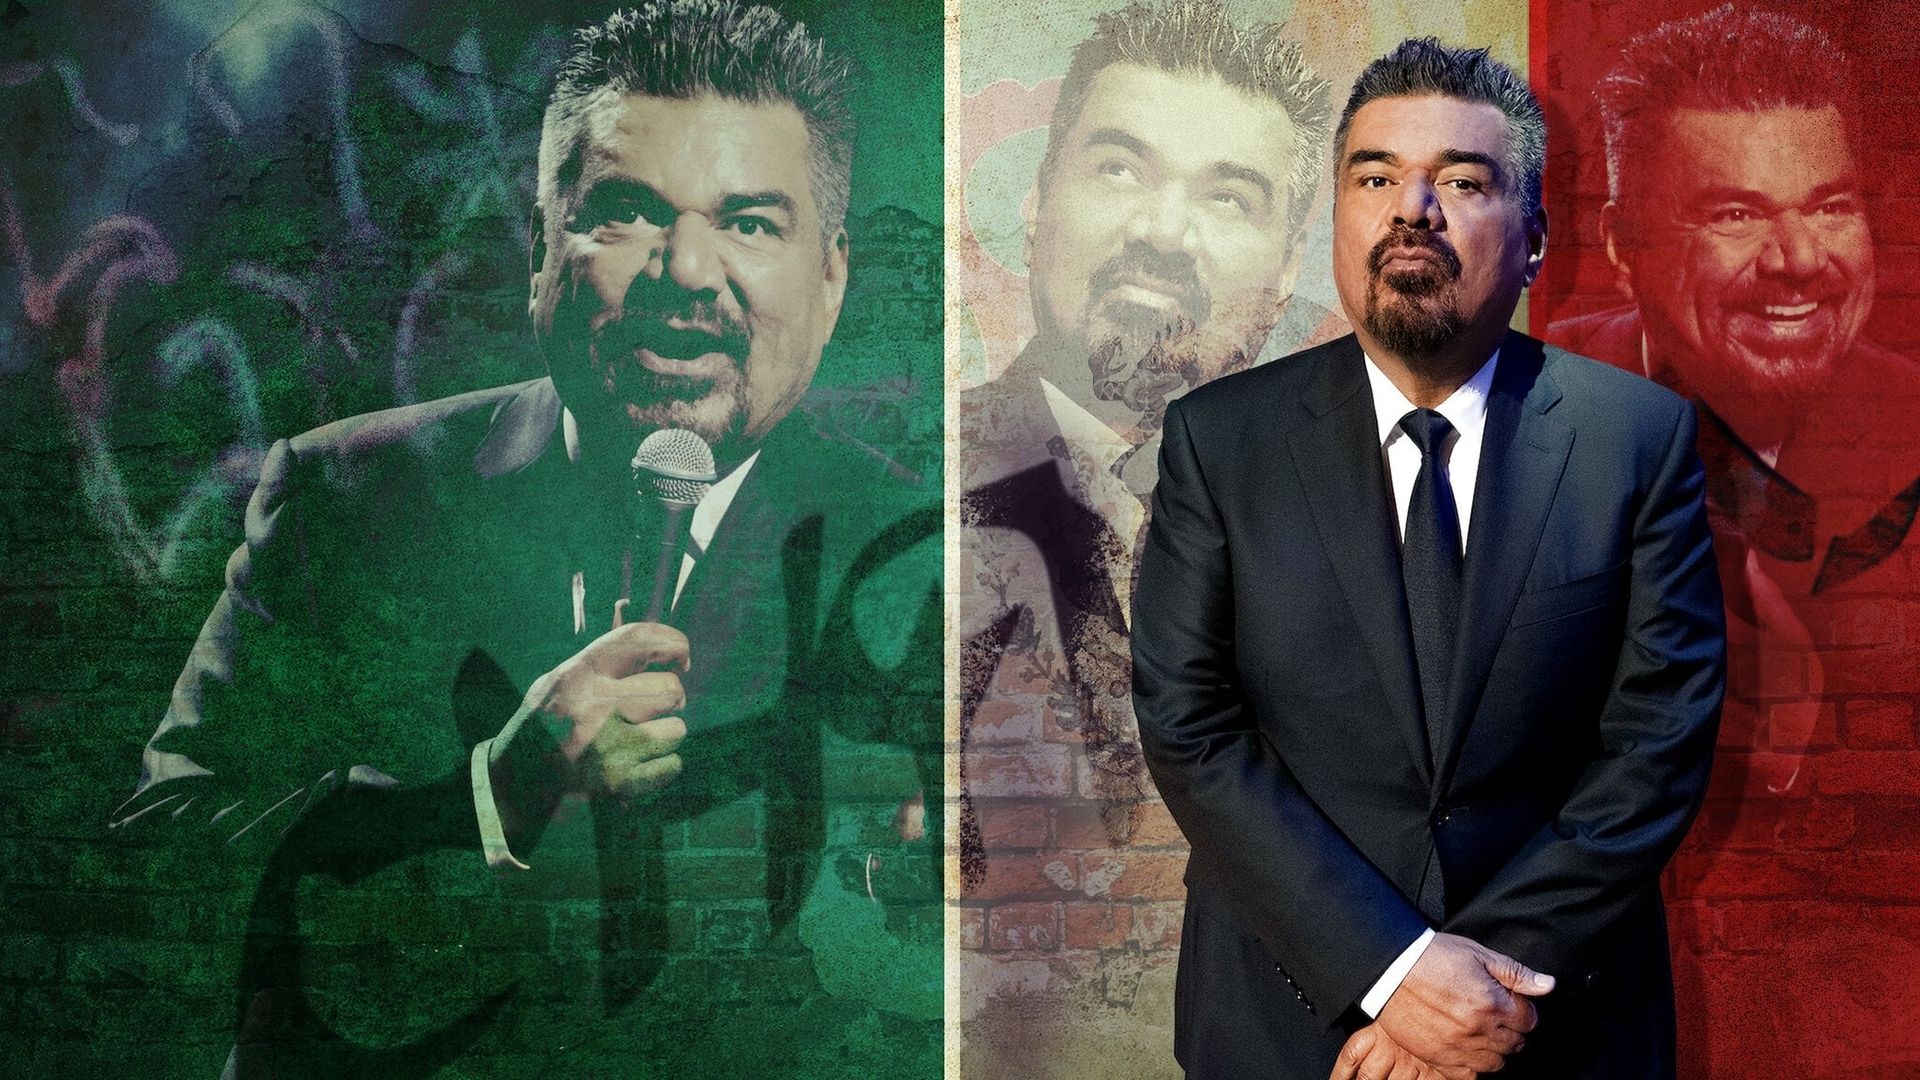 George Lopez: We'll Do It for Half background